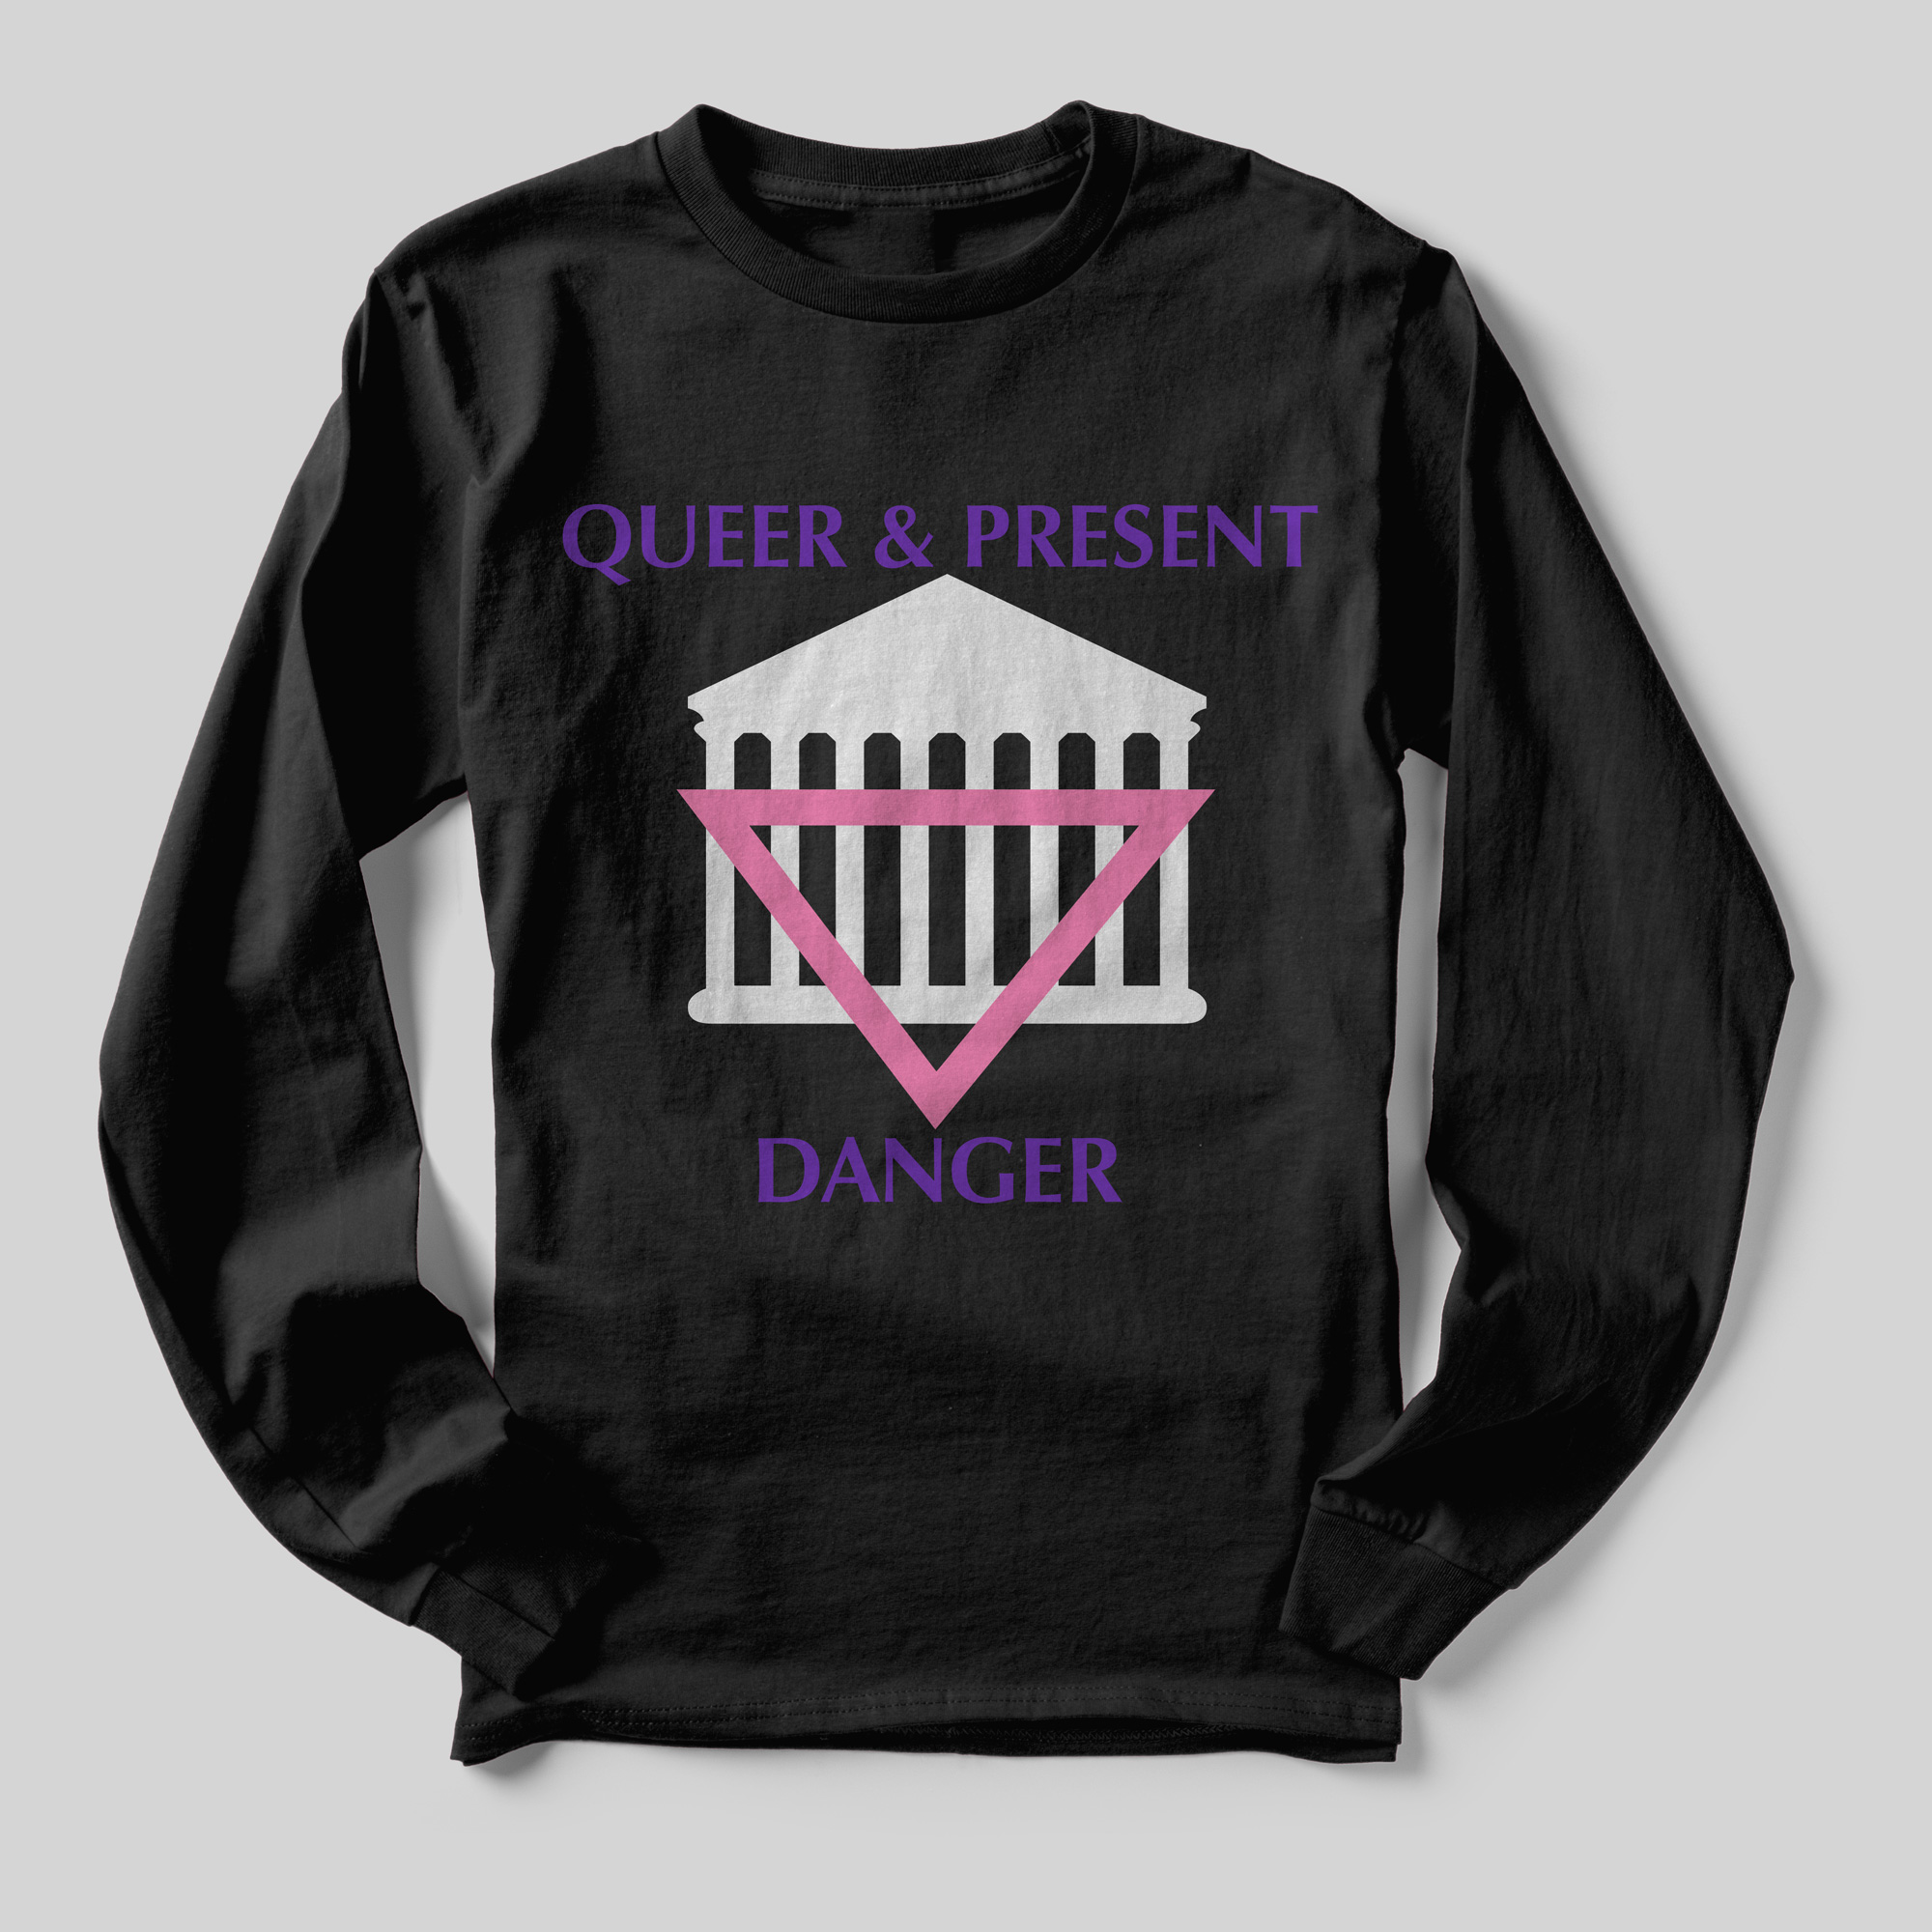 A black long-sleeved t-shirt that reads Queer & Present Danger in purple text and an illustration of the entrance to the Capitol Building with an upside-down pink triangle superimposed on it.